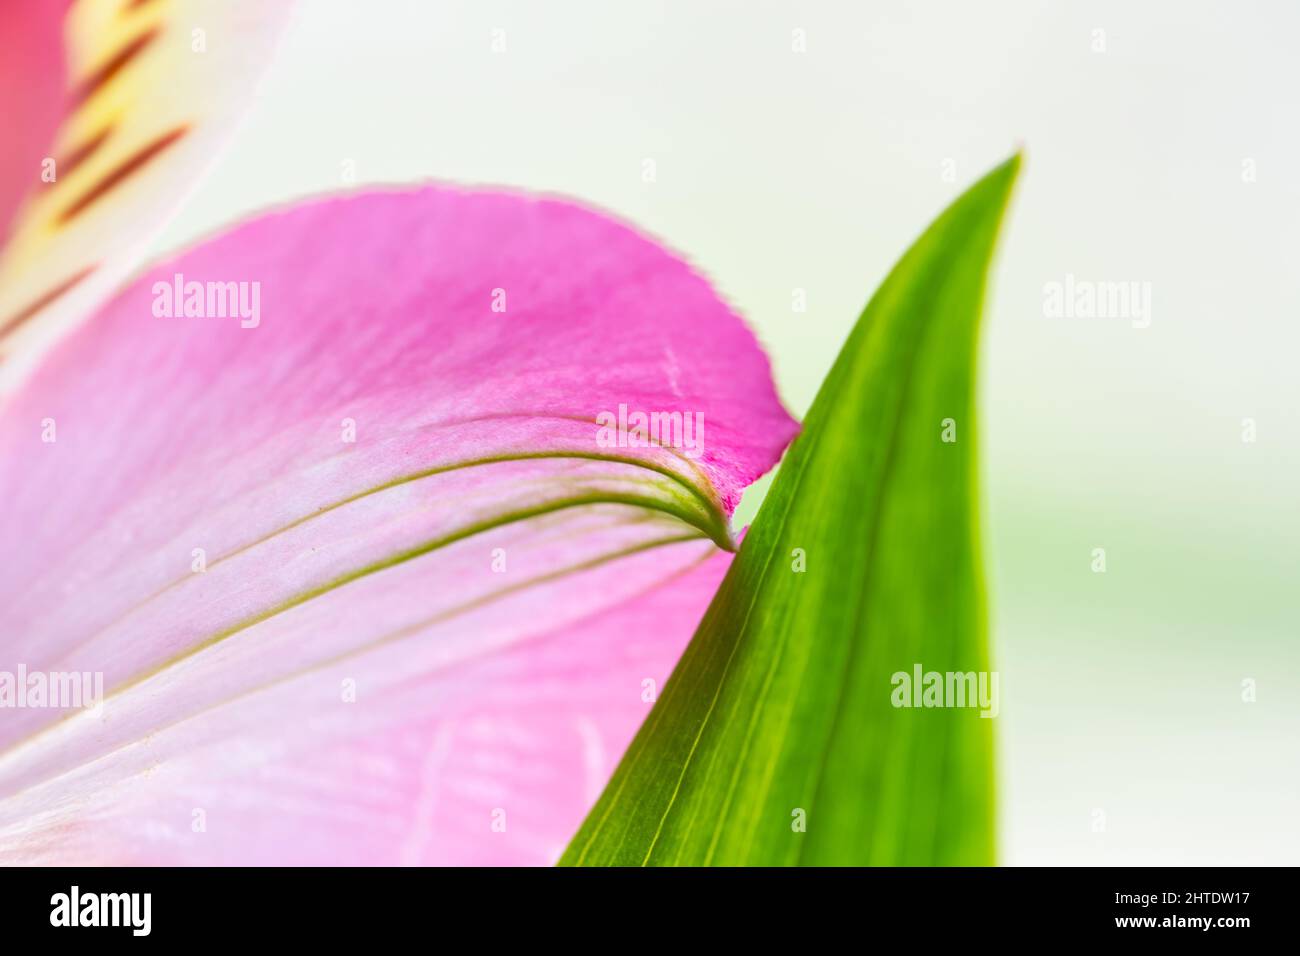 Abstract flower background with petal and leaf of pink Lily of Incas or Alstroemeria. Selective focus. Spring or beauty concept. Stock Photo